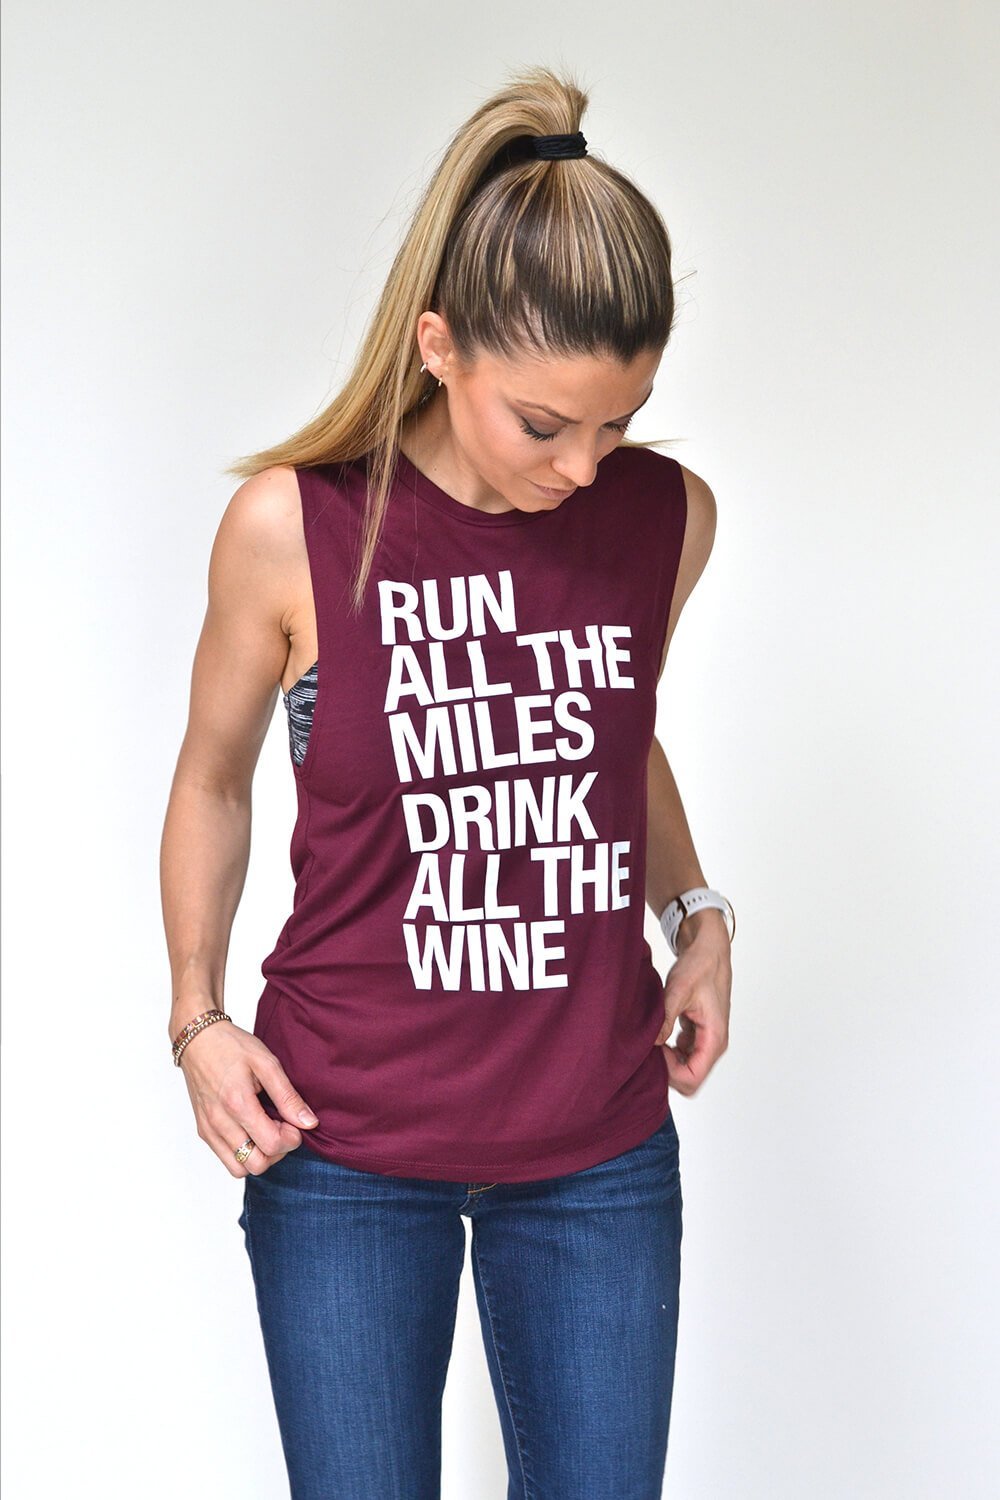 Run All The Miles, Drink All The Wine - Muscle Tank - Sarah Marie Design Studio